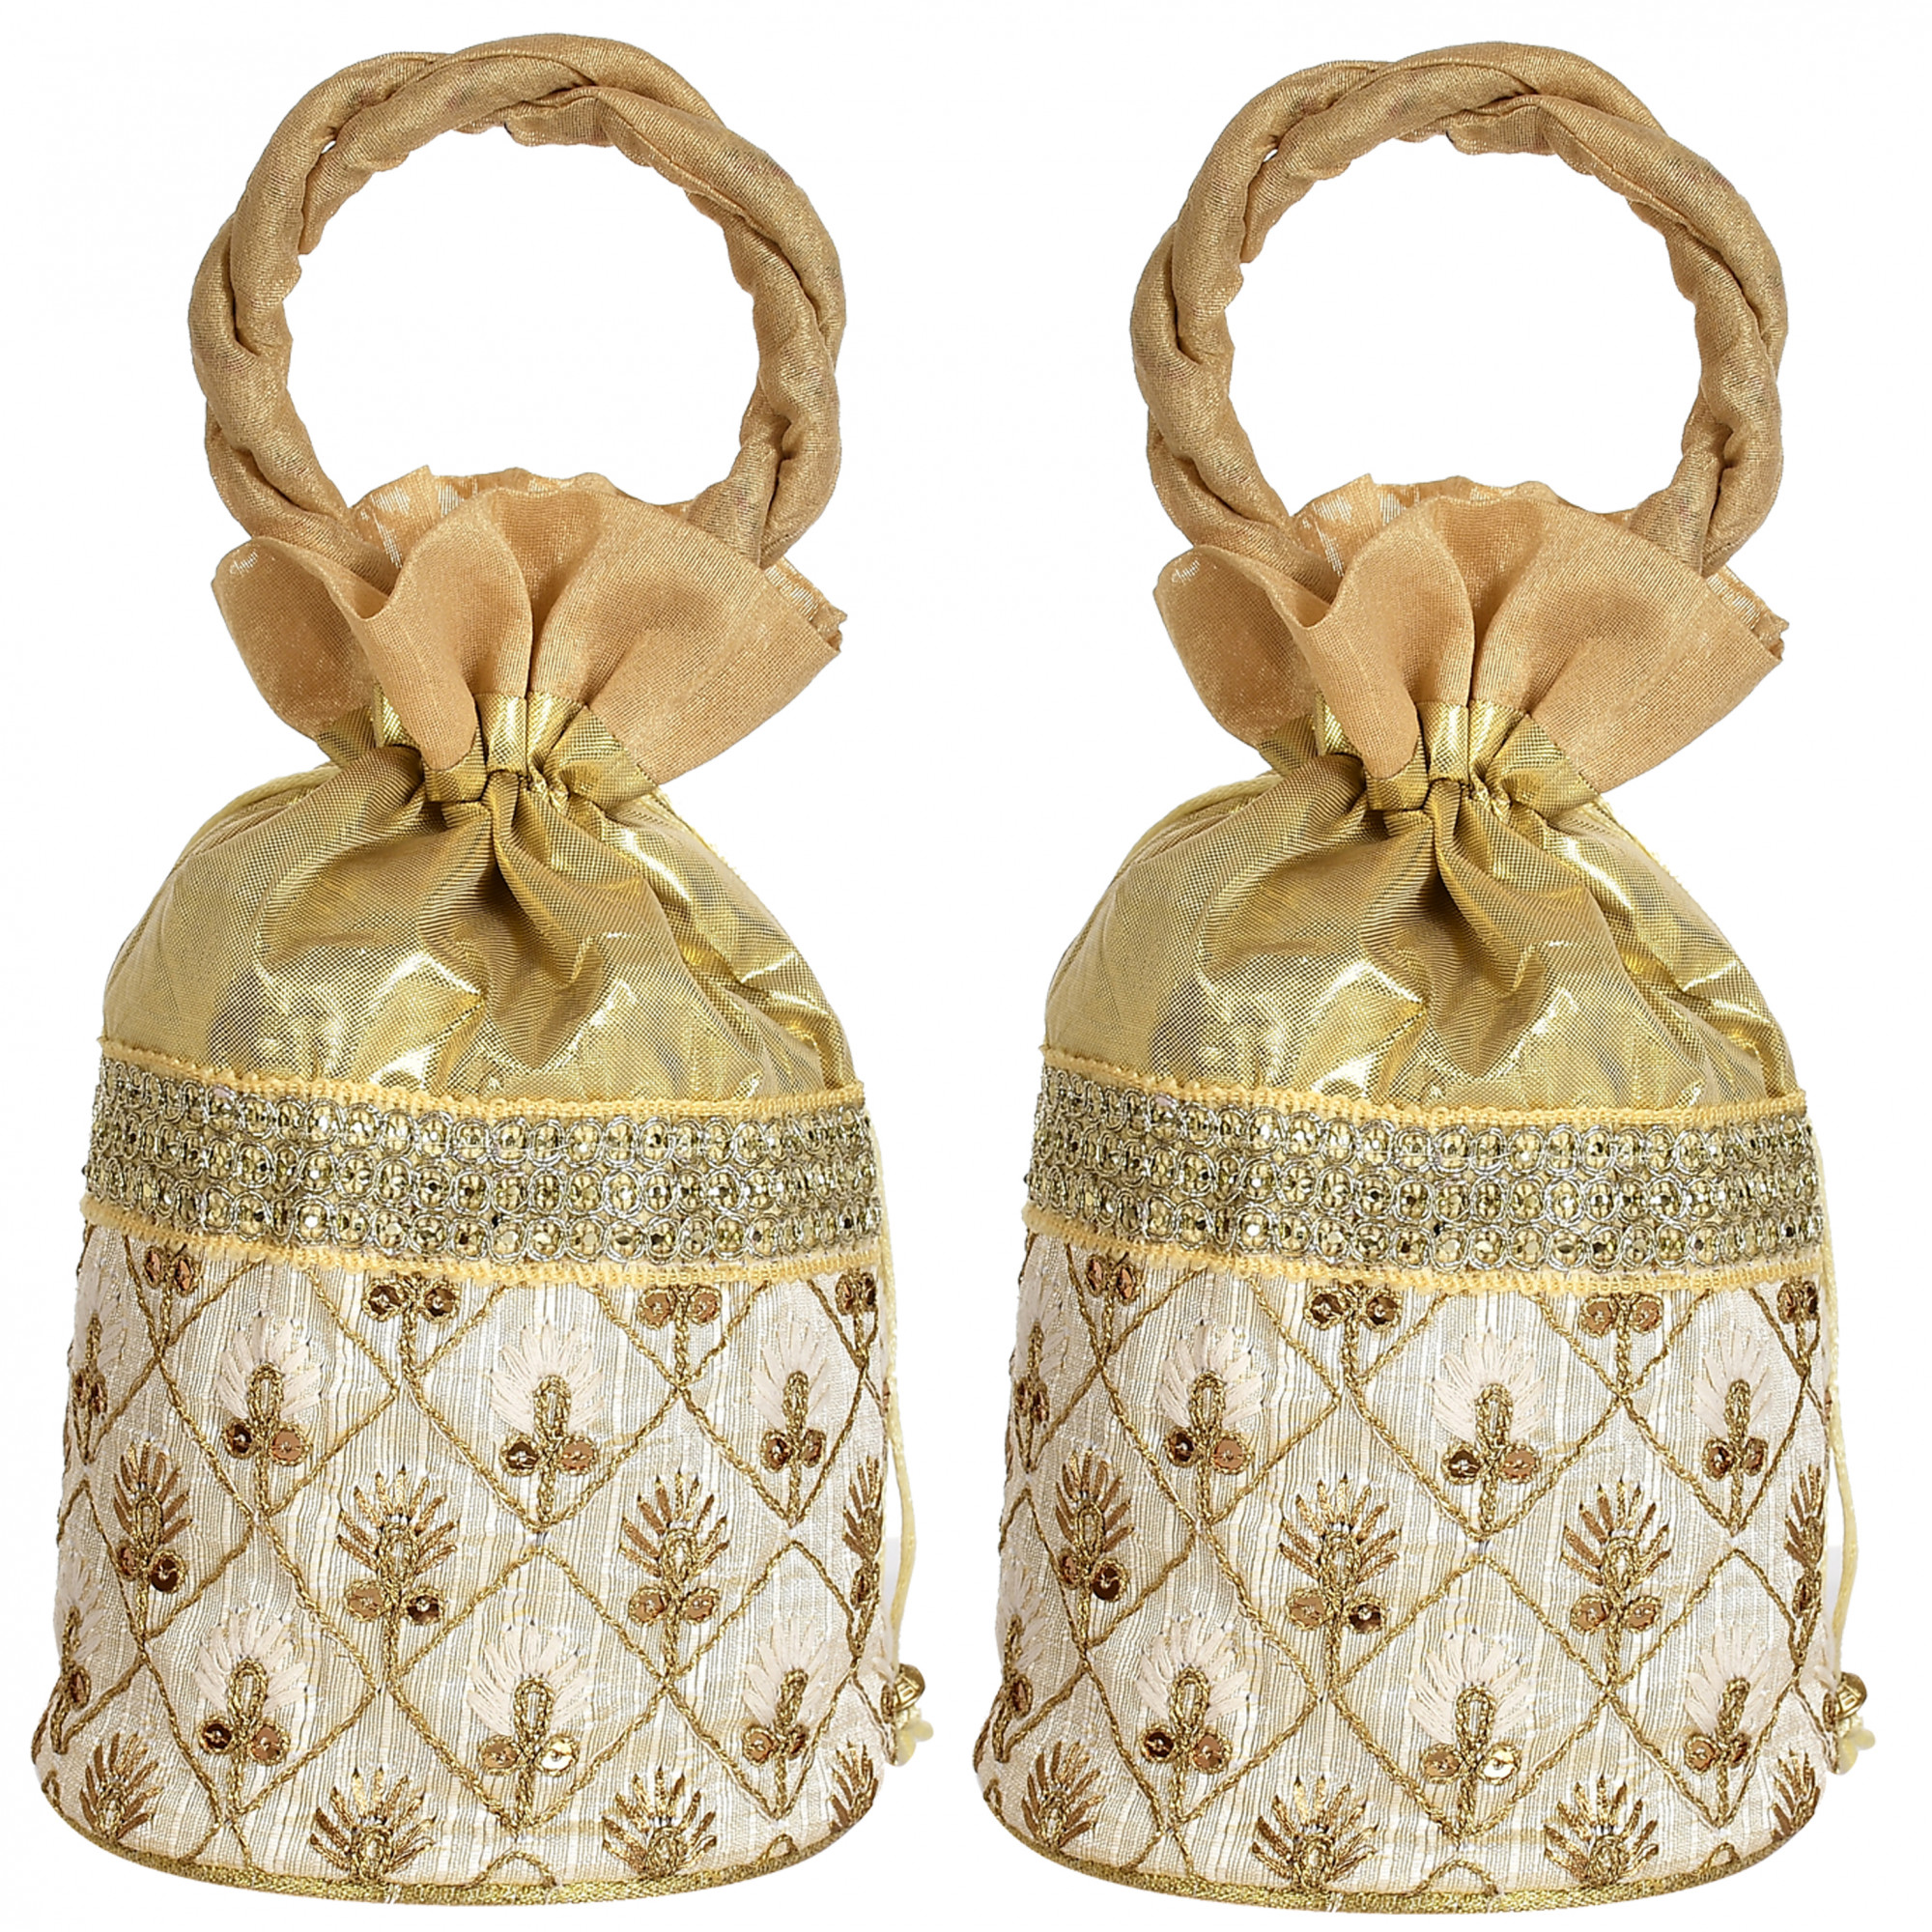 Kuber Industries Embroidered Design Drawstring Potli Bag Party Wedding Favor Gift Jewelry Bags-(Gold)